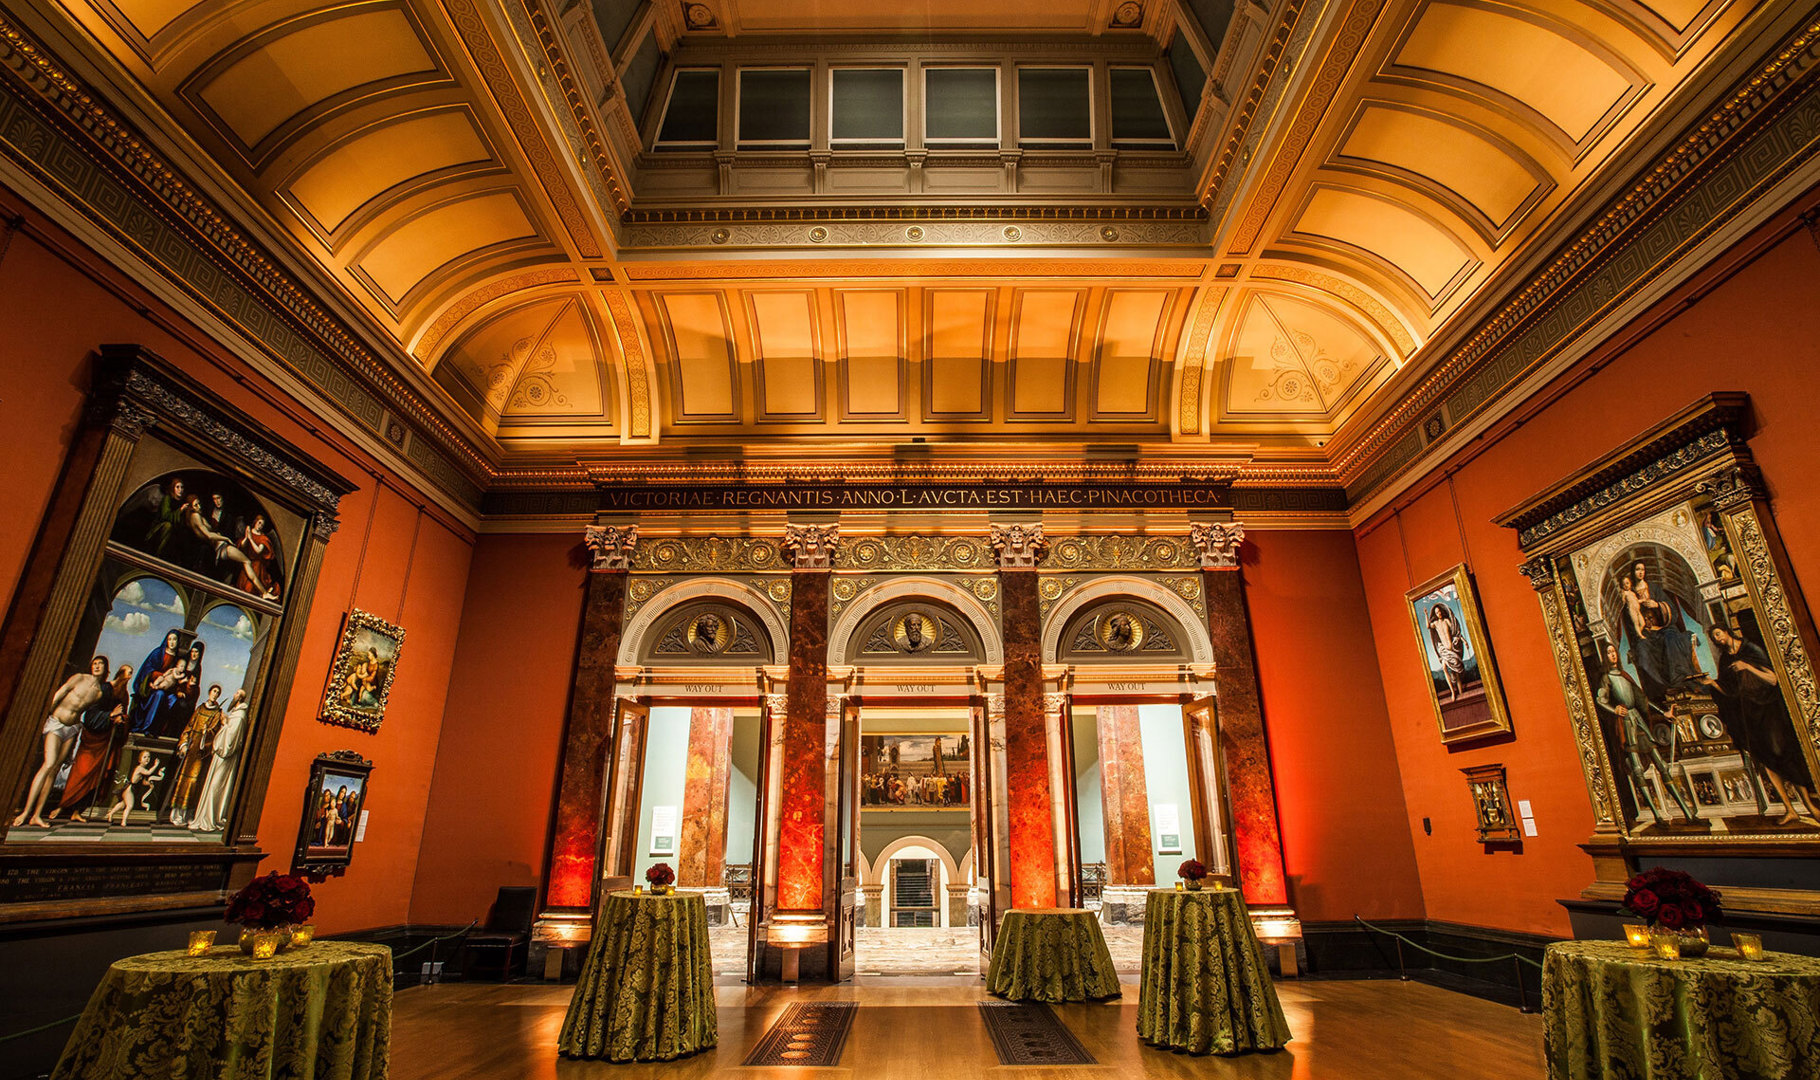 Weddings at the National Gallery | Venue hire | National Gallery, London